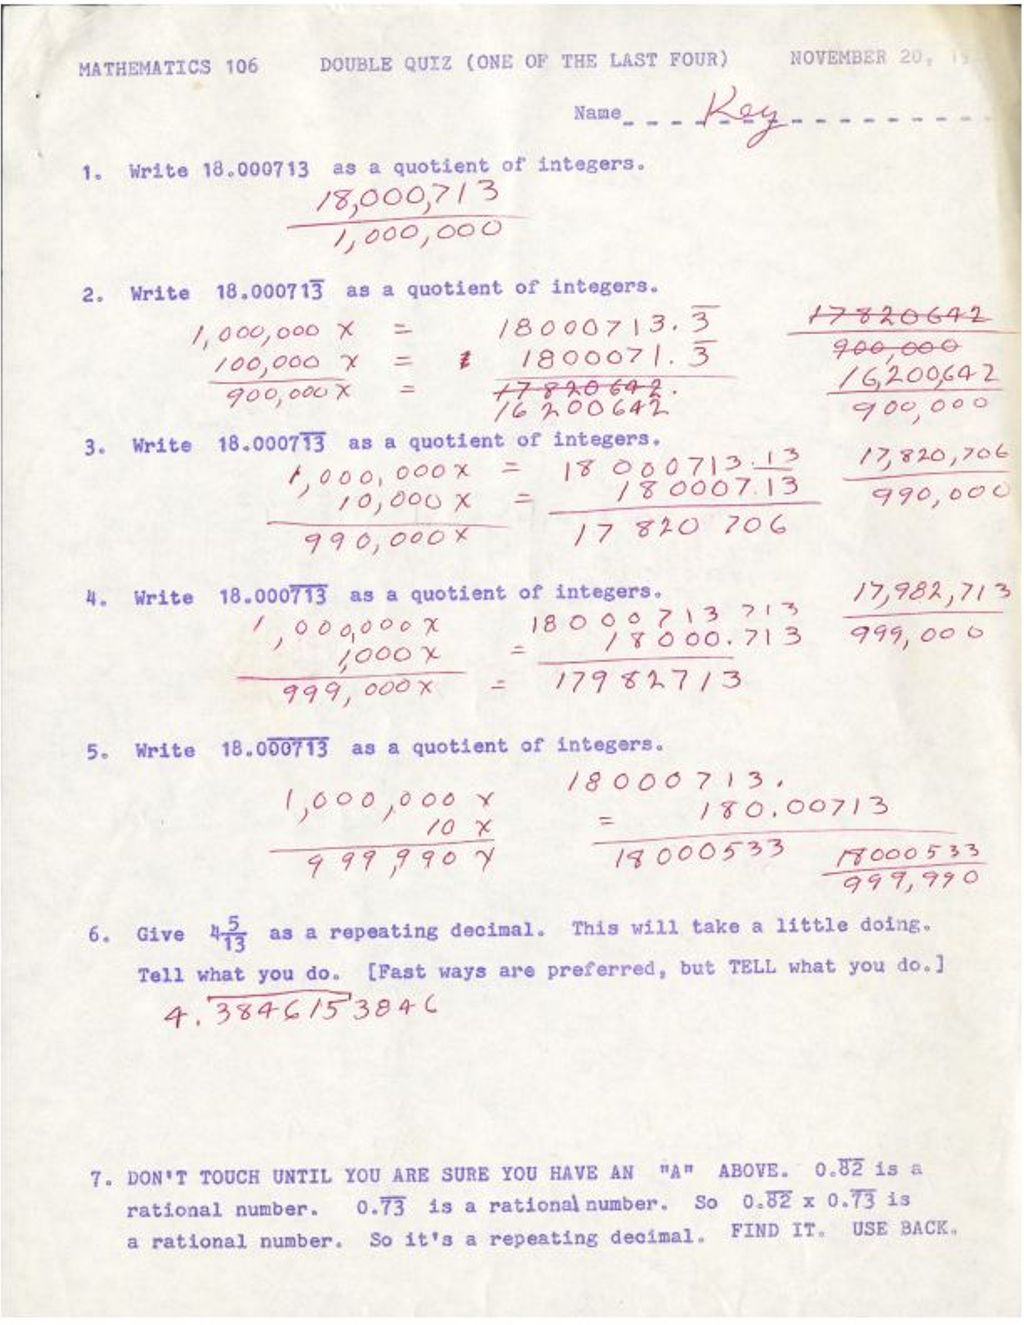 Miniature of Math 106 Double Quiz “Write 18.000713 as a quotient of integers.” AK